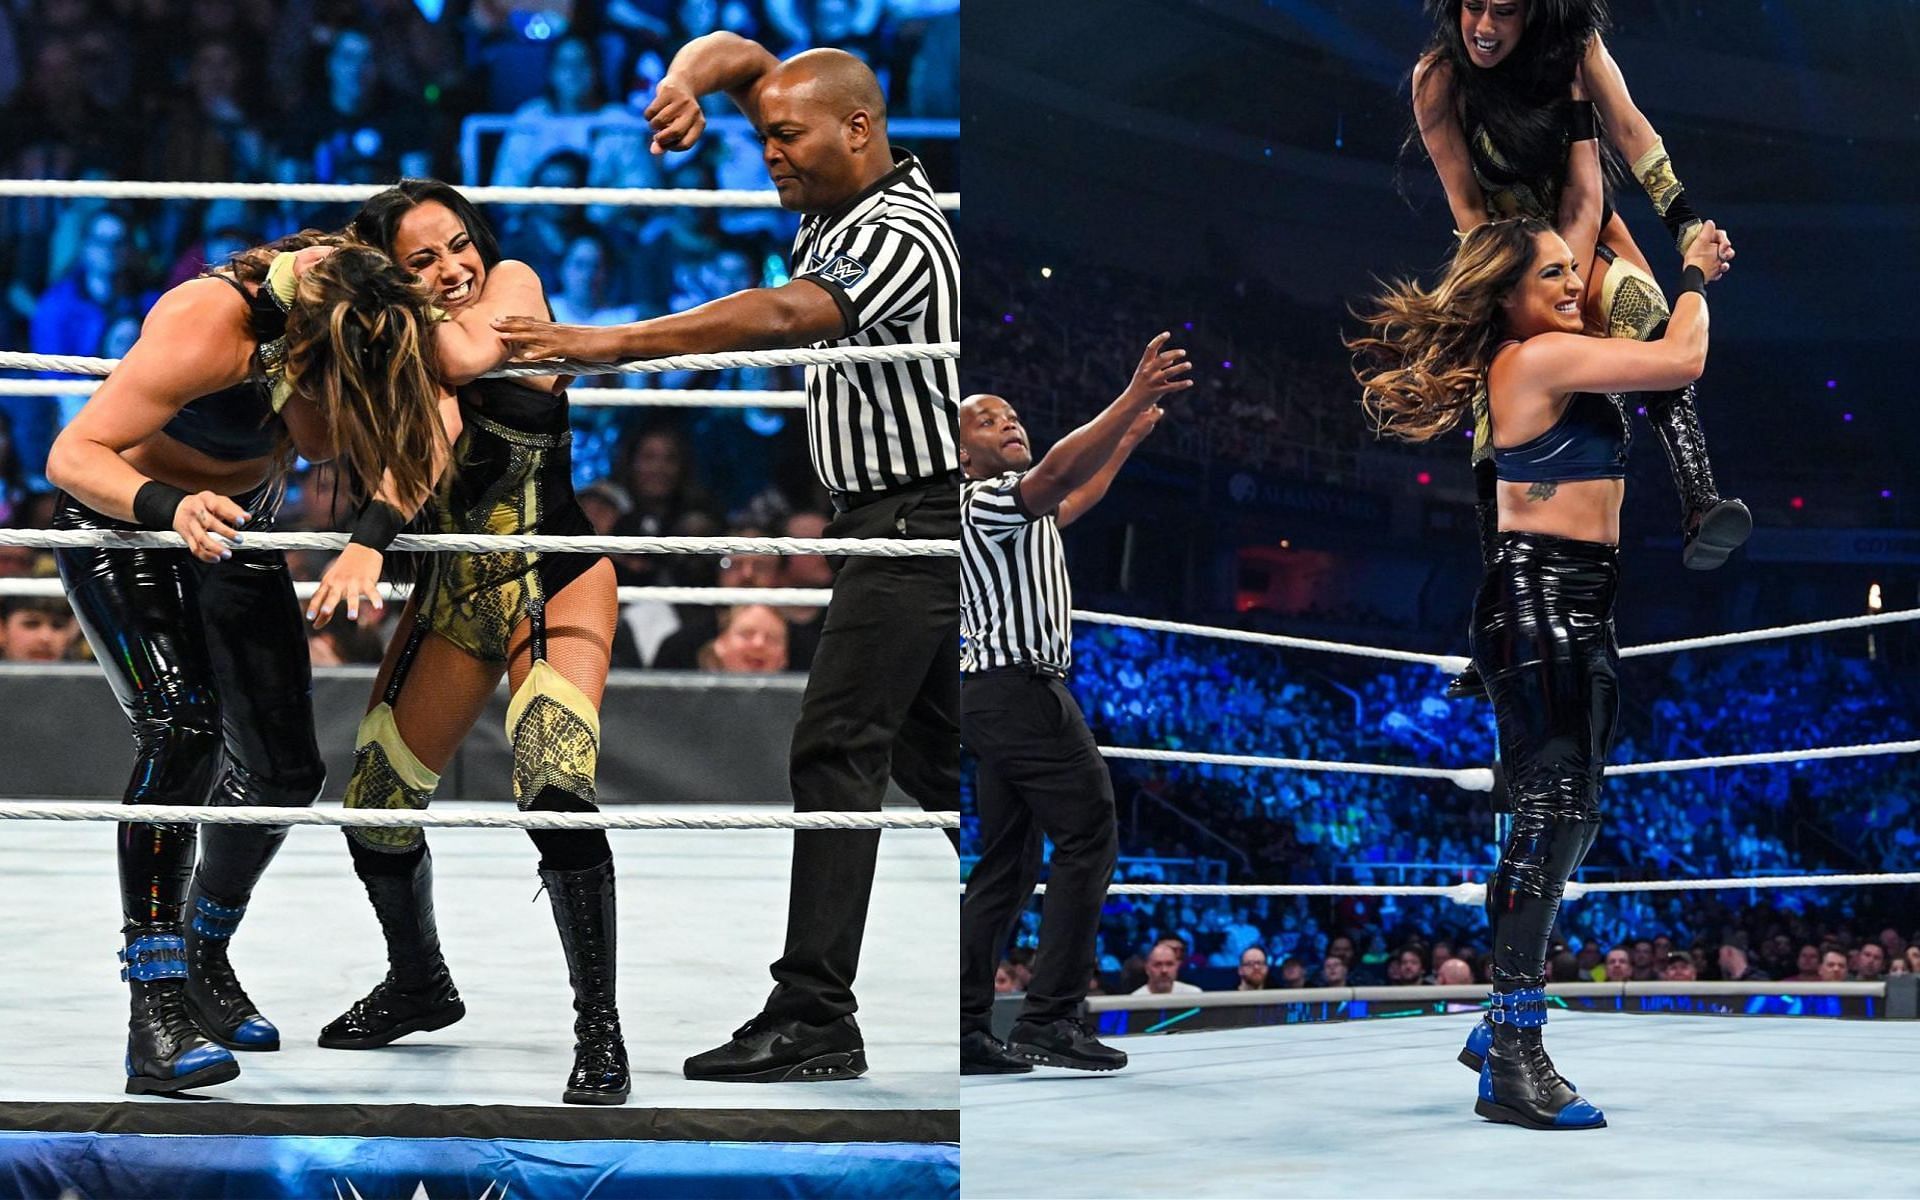 Raquel Rodriguez faces a local competitor during her debut on SmackDown.